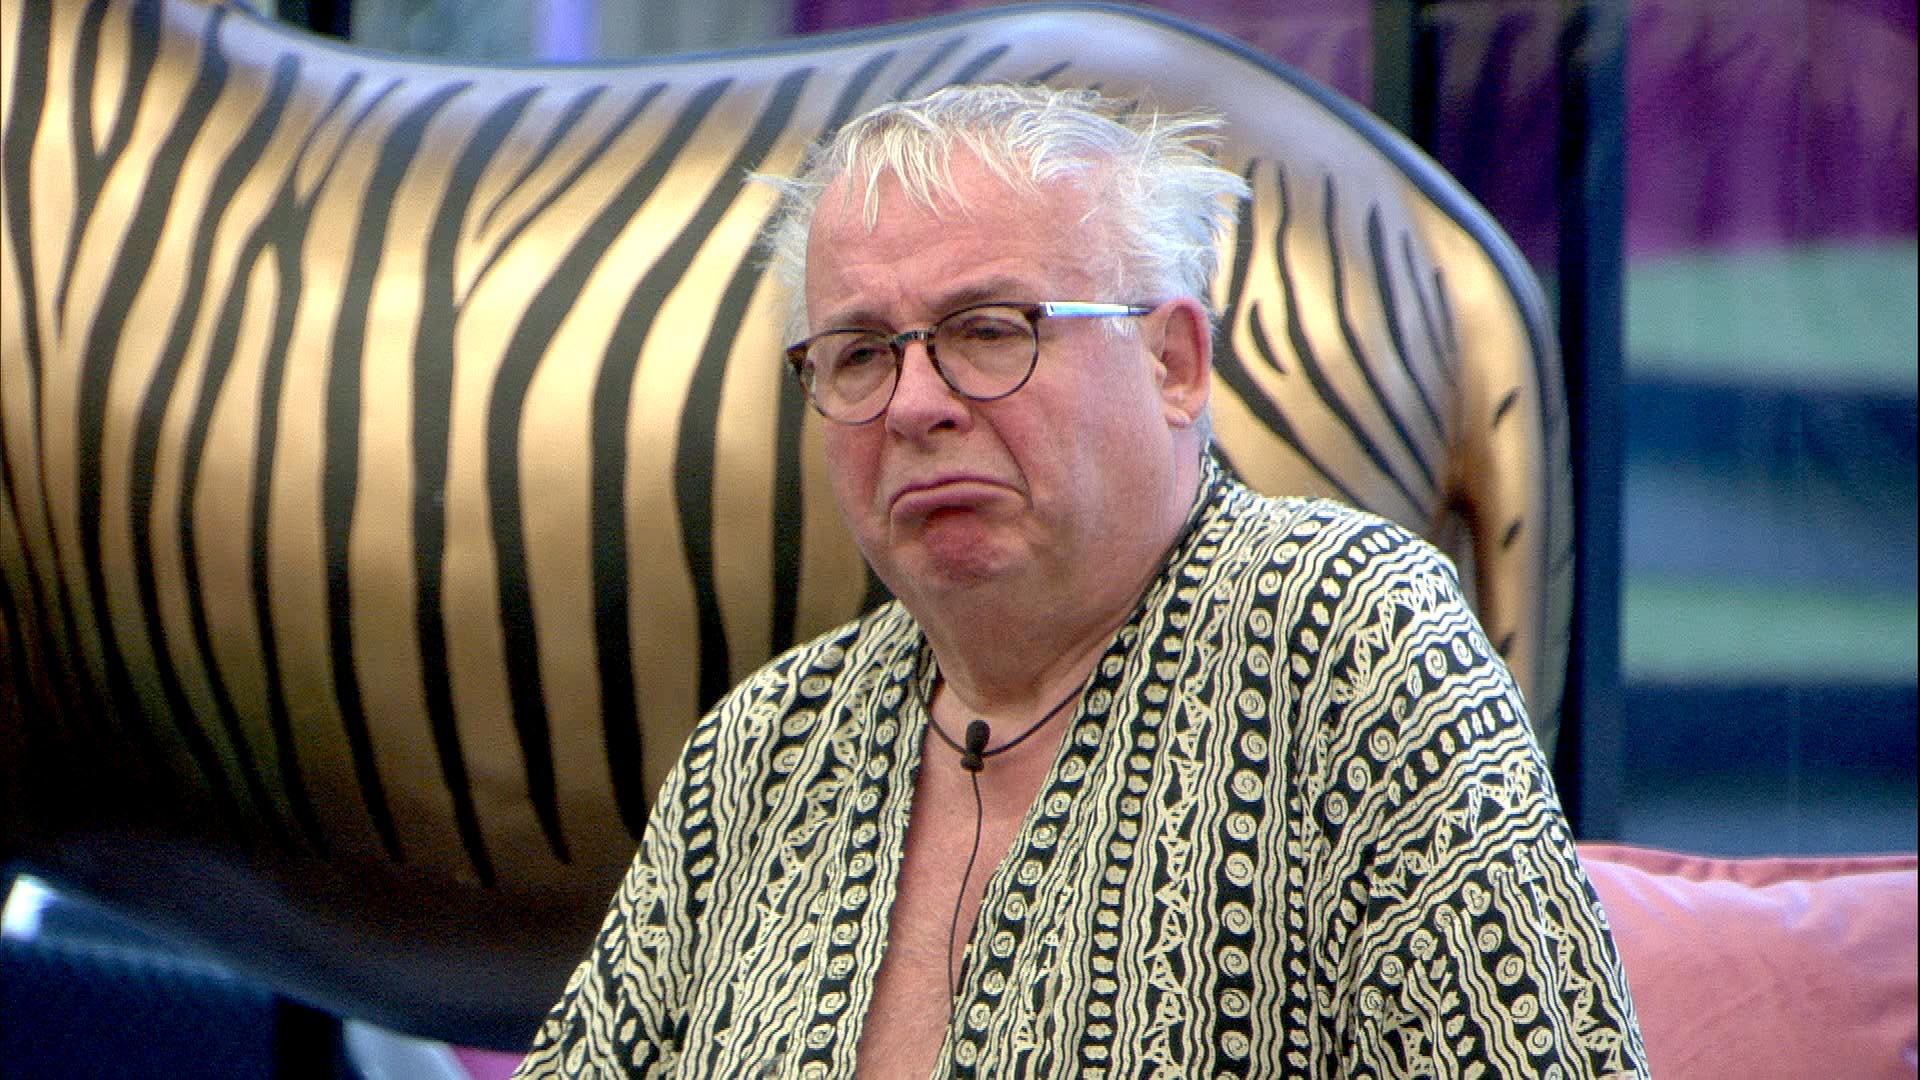 Christopher Biggins felt “violated” after his phone is snatched by thug